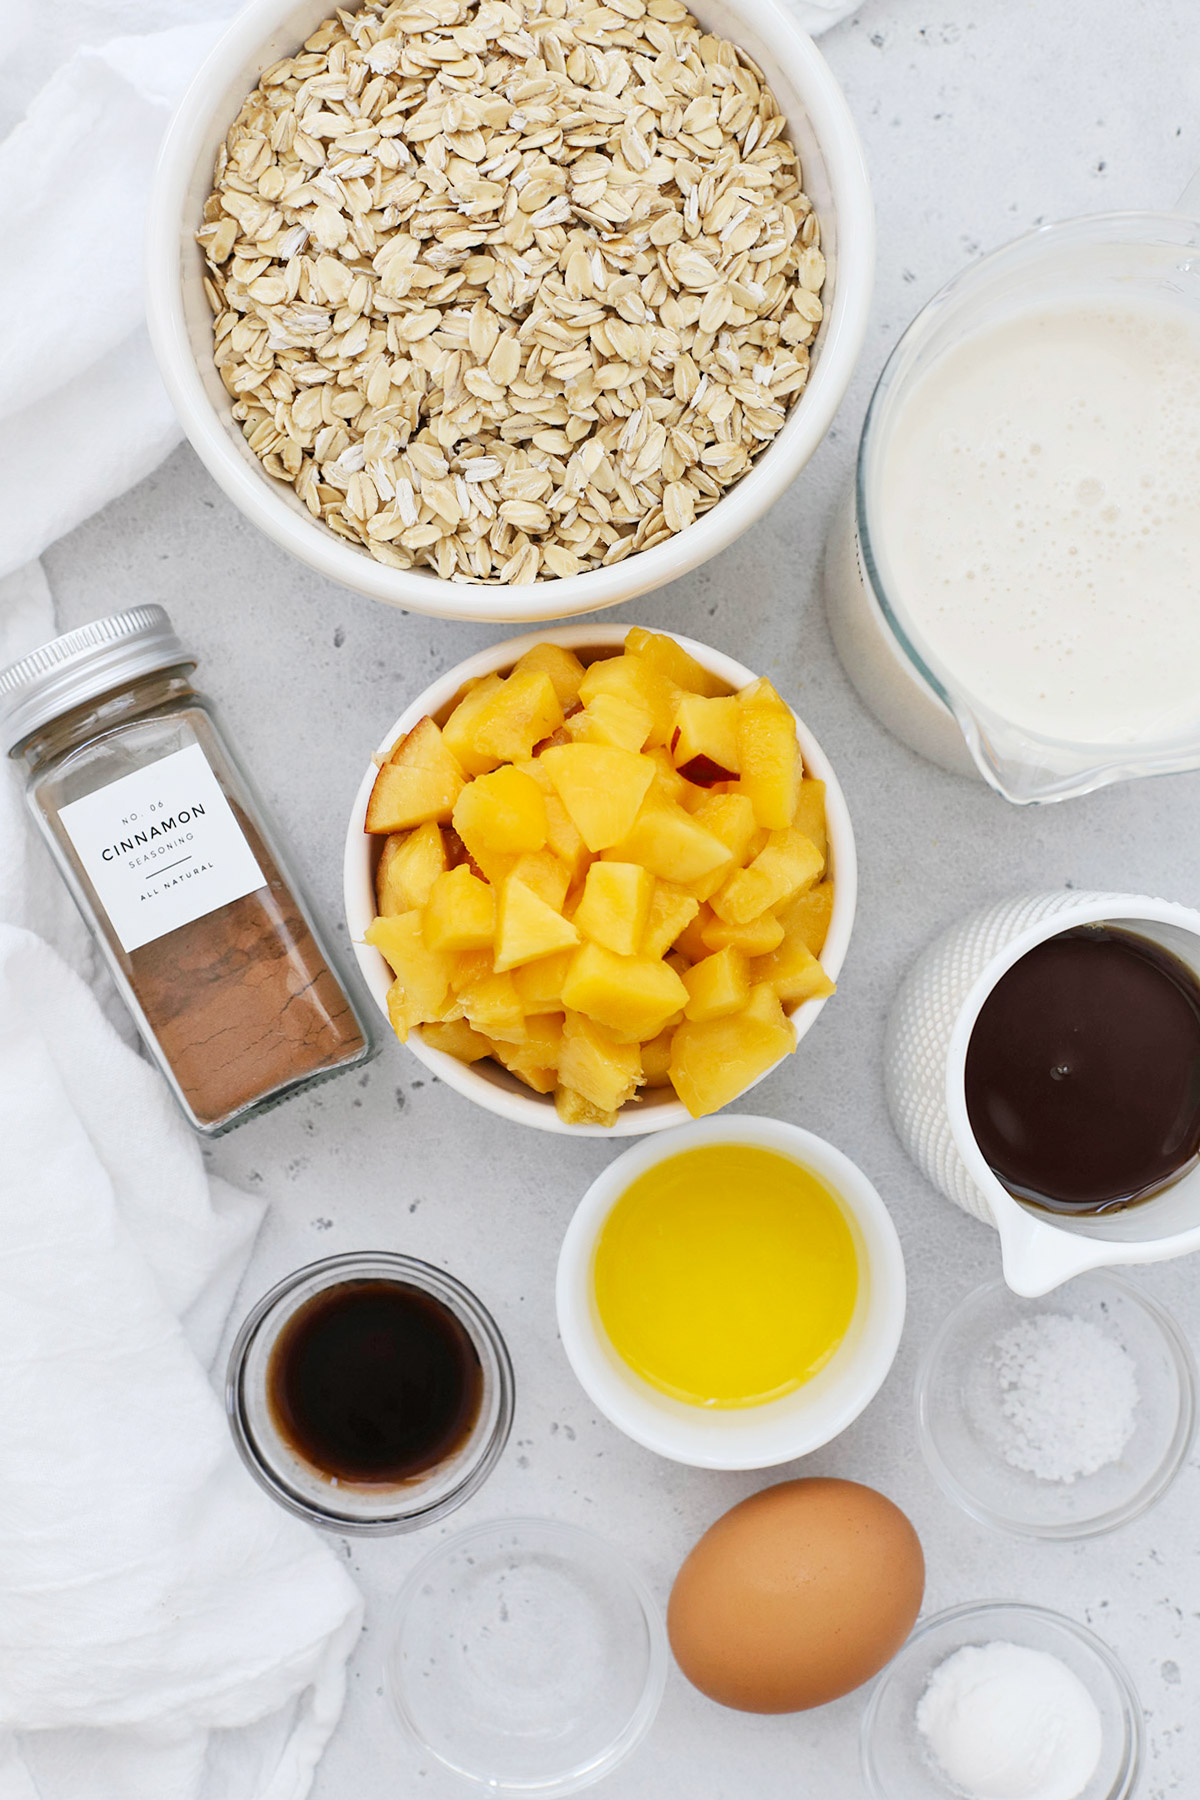 Overhead view of ingredients for gluten-free peach baked oatmeal